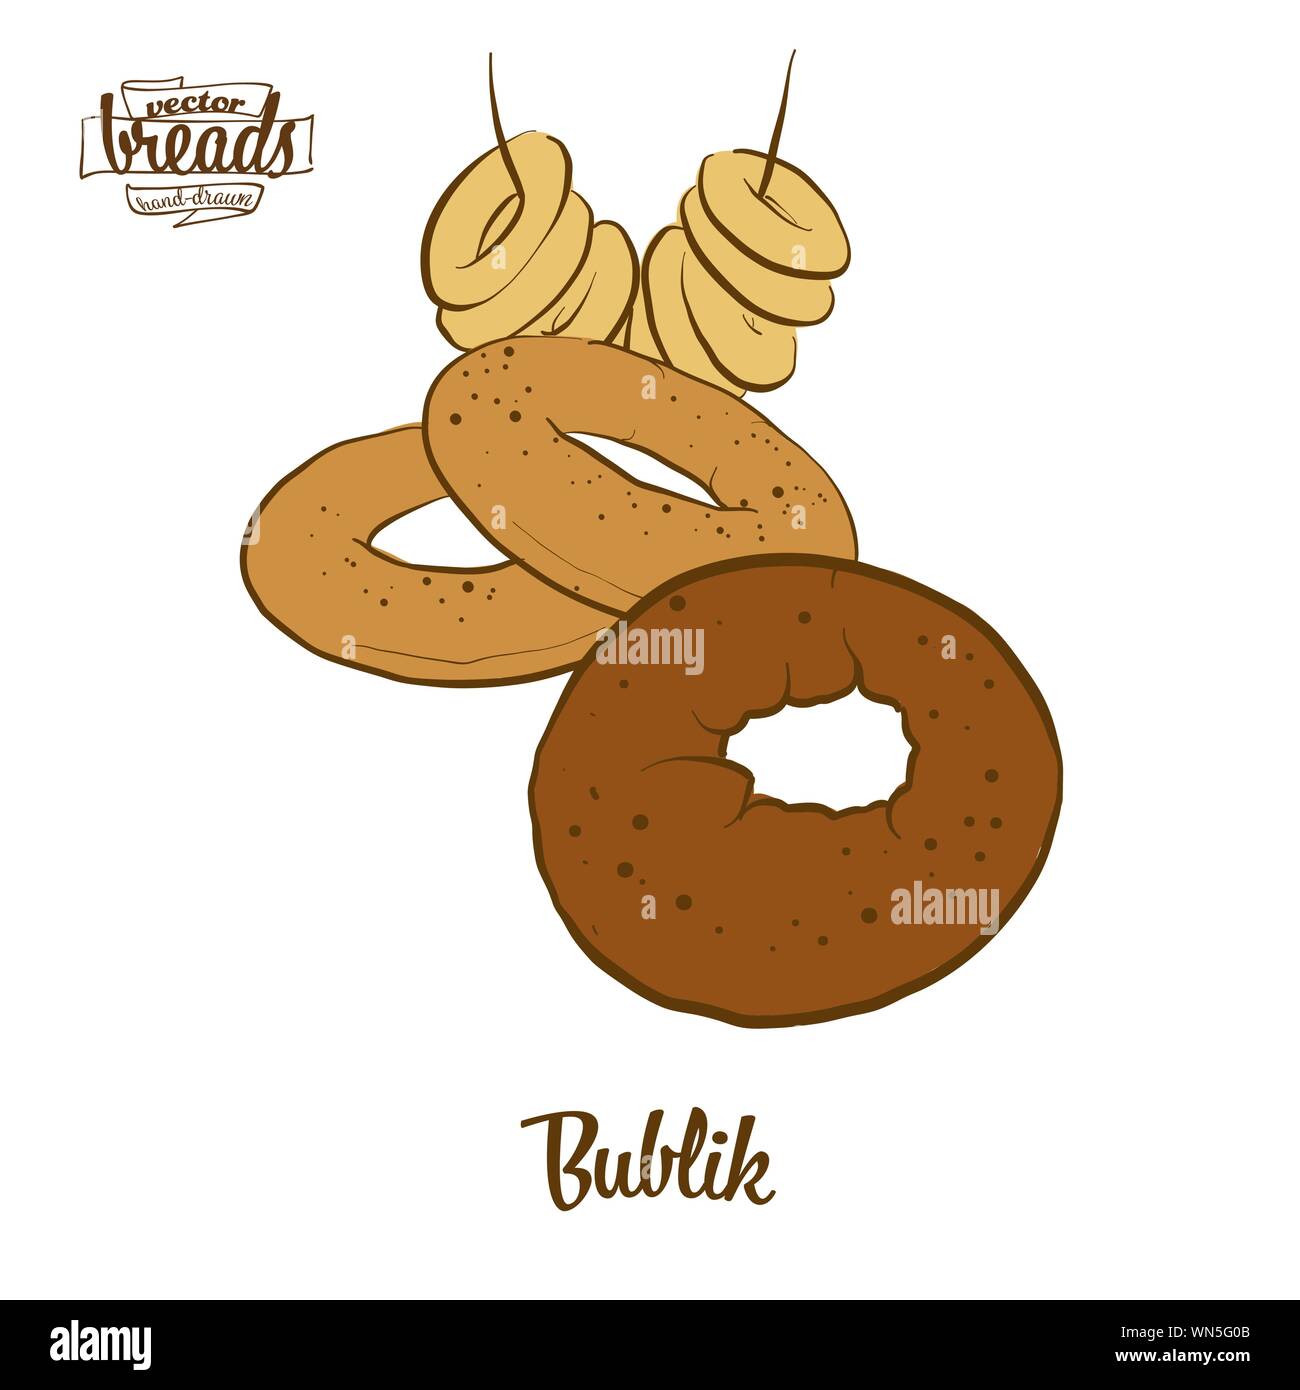 Colored drawing of Bublik bread. Vector illustration of Wheat bread food, usually known in Poland. Colored Bread sketches. Stock Vector